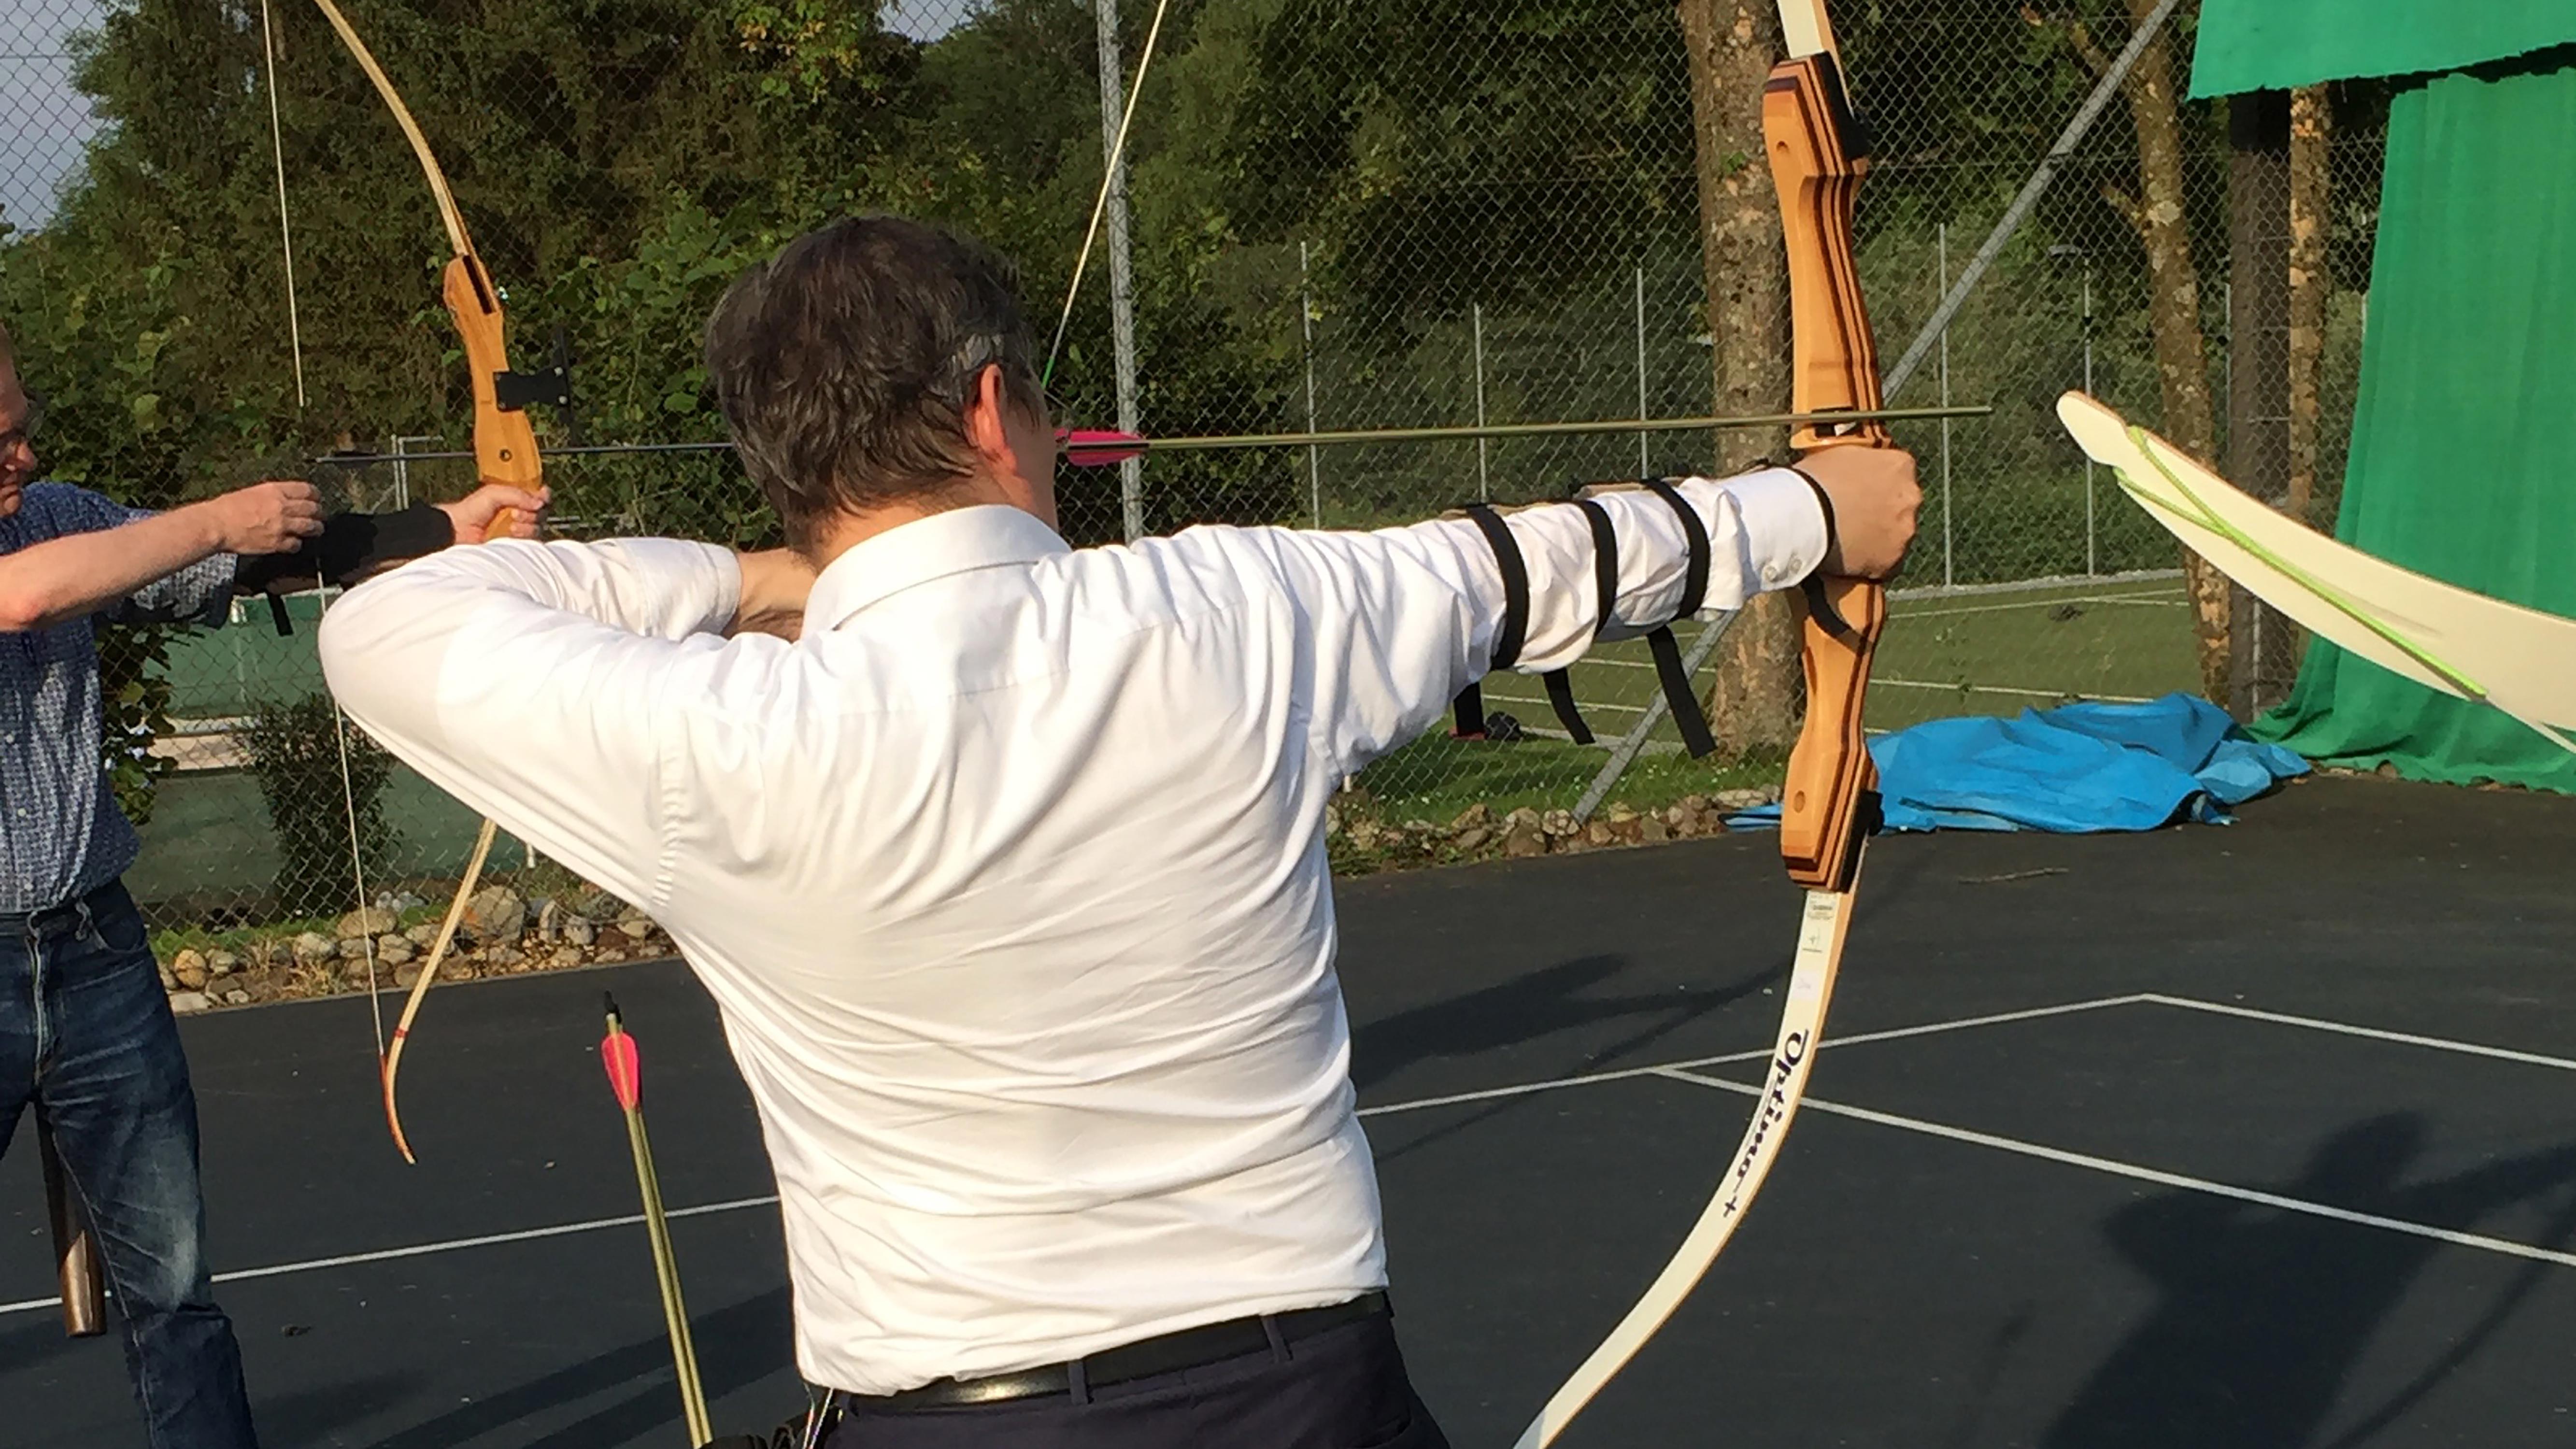 <p>Hitting the bullseye: For more than 20 years, the leadership teams of UZH and ETH Zurich have got together every year for the &ldquo;Rektorenschiessen.&rdquo; This picture was taken in July 2016, when Sarah Springman, Rector of ETH, narrowly beat Michael Hengartner to first place.&nbsp;In his final &ldquo;Rektorenschiessen&rdquo; in summer 2019, he even came out on top, but unfortunately there are no pictures of his victory.</p> (Image: Jürg Dinner)